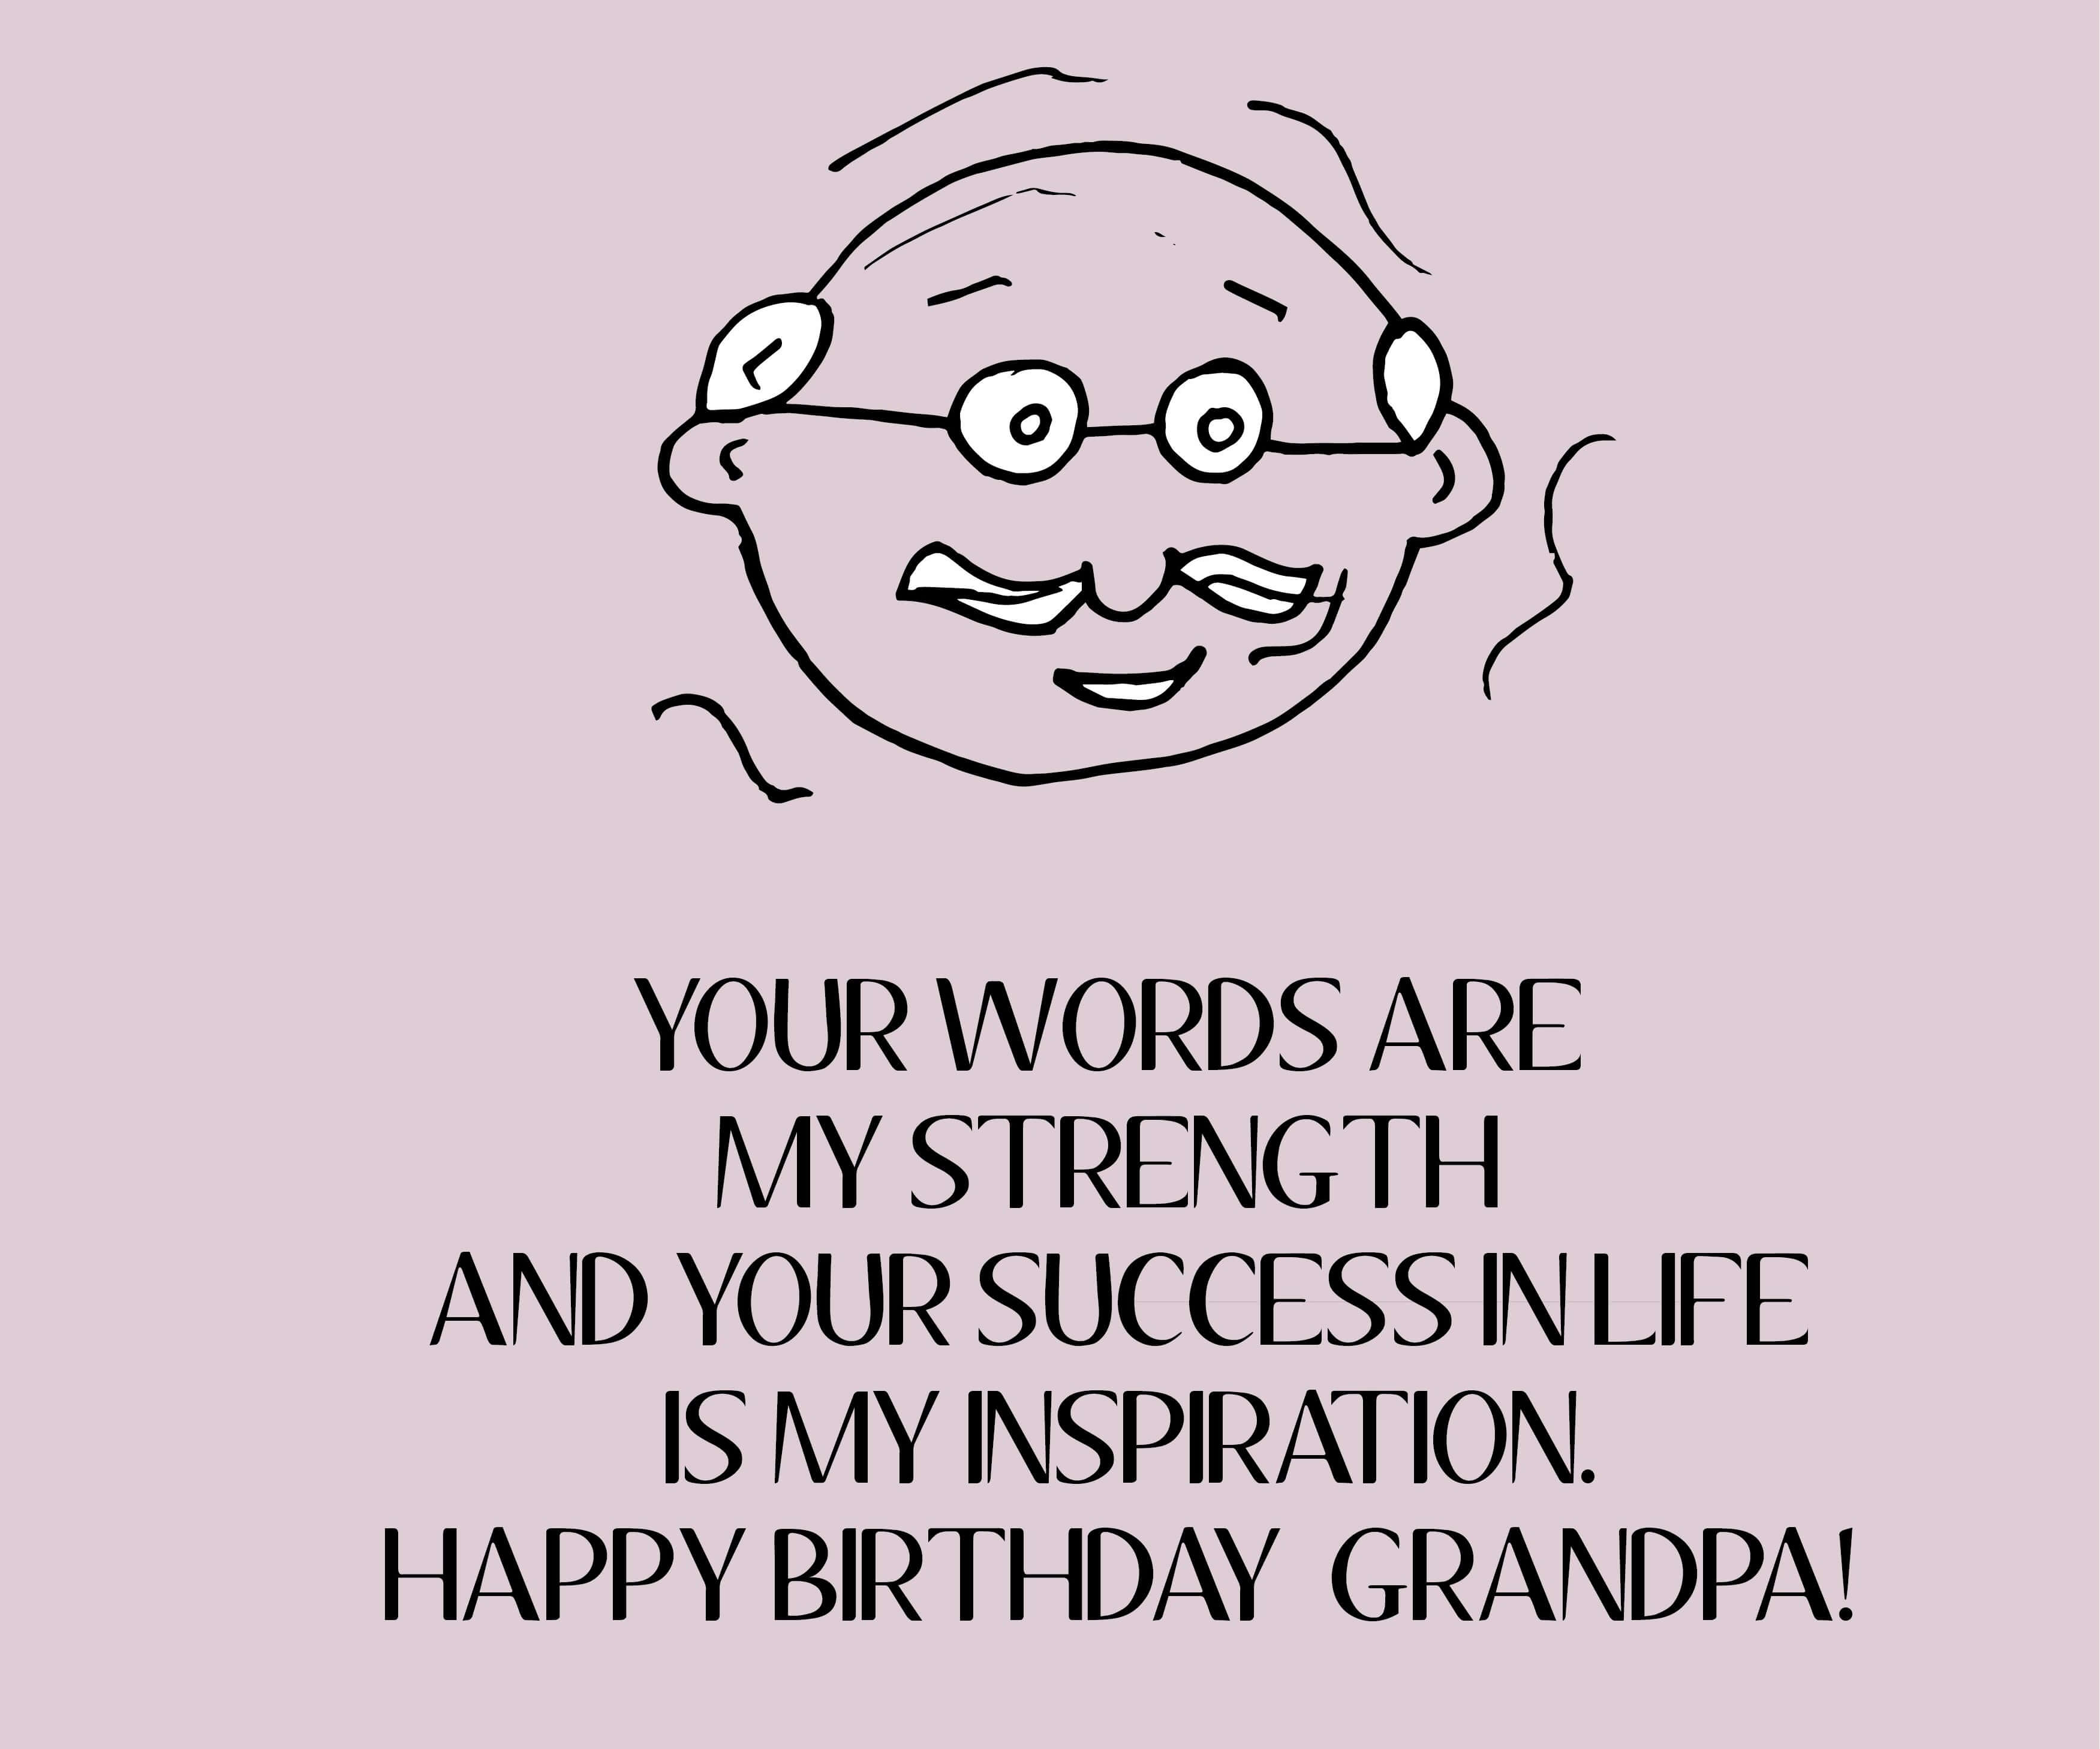 Happy Birthday Grandfather 86+ Wishes, Quotes, Messages, Greeting